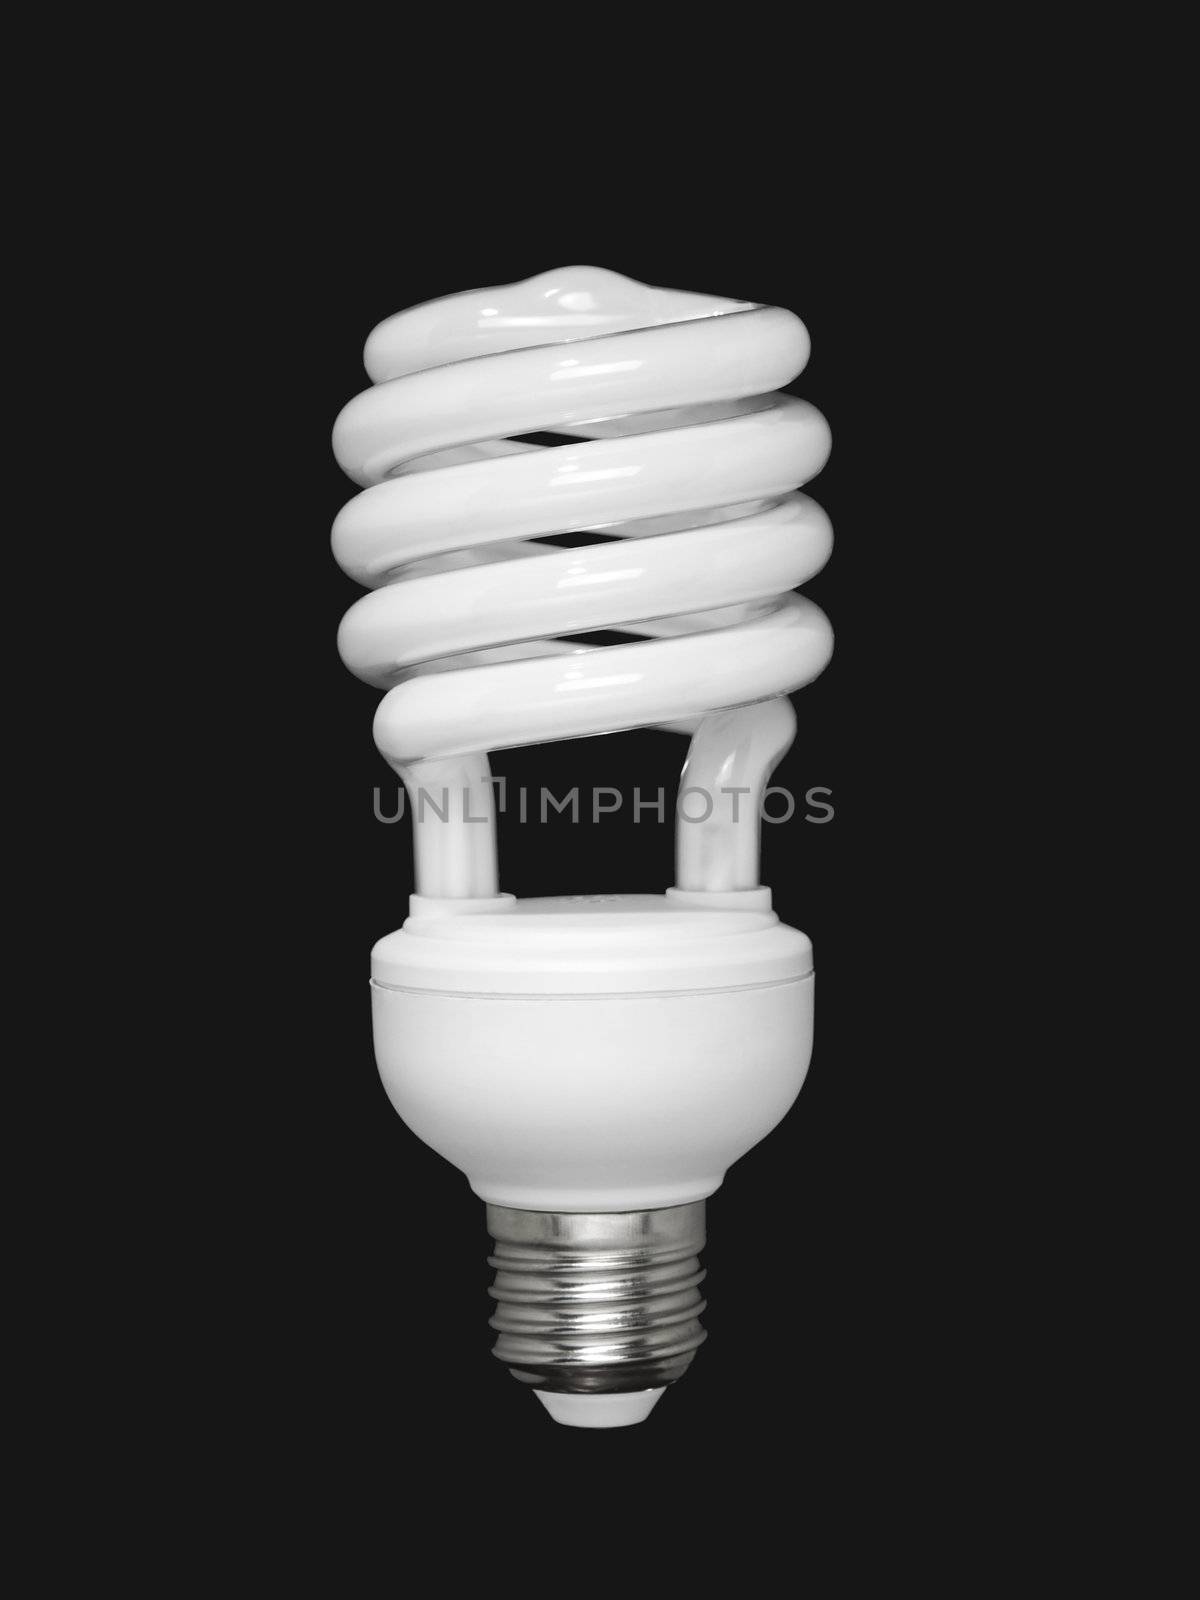 Compact fluorescent light bulb isolated over black background.